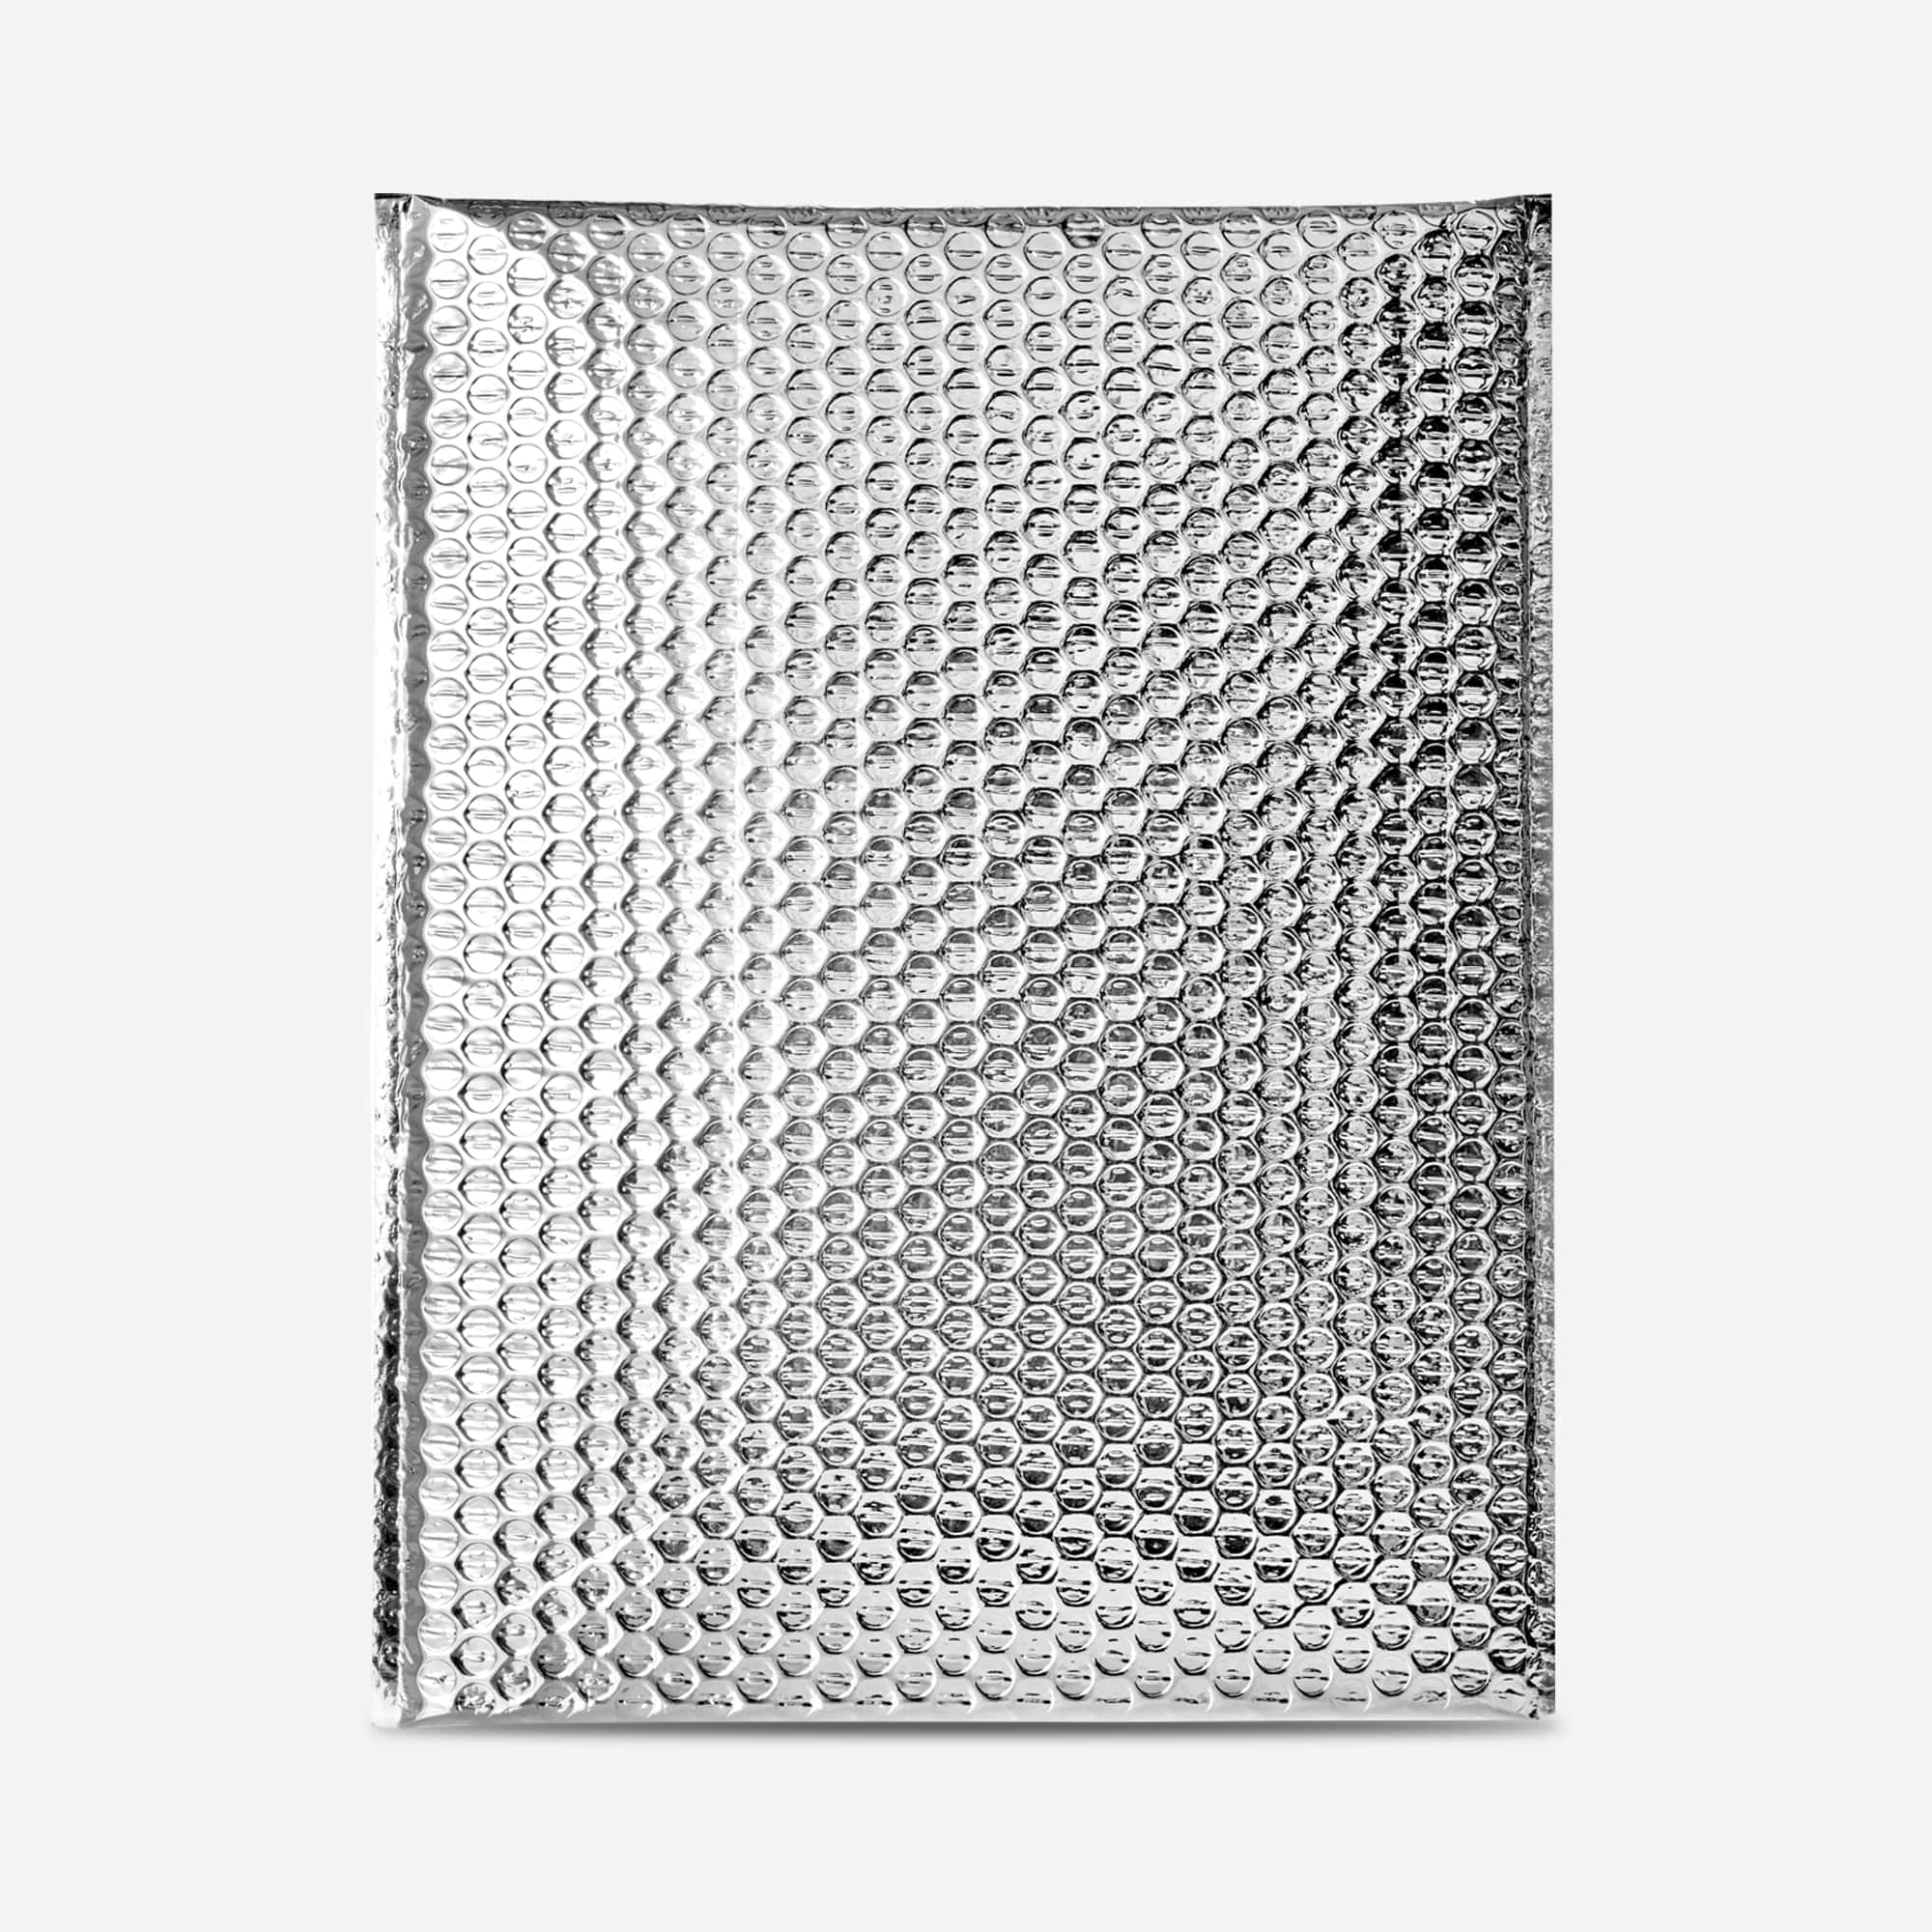 Thermal reflective insulated cold shield bubble mailer 11 x 15